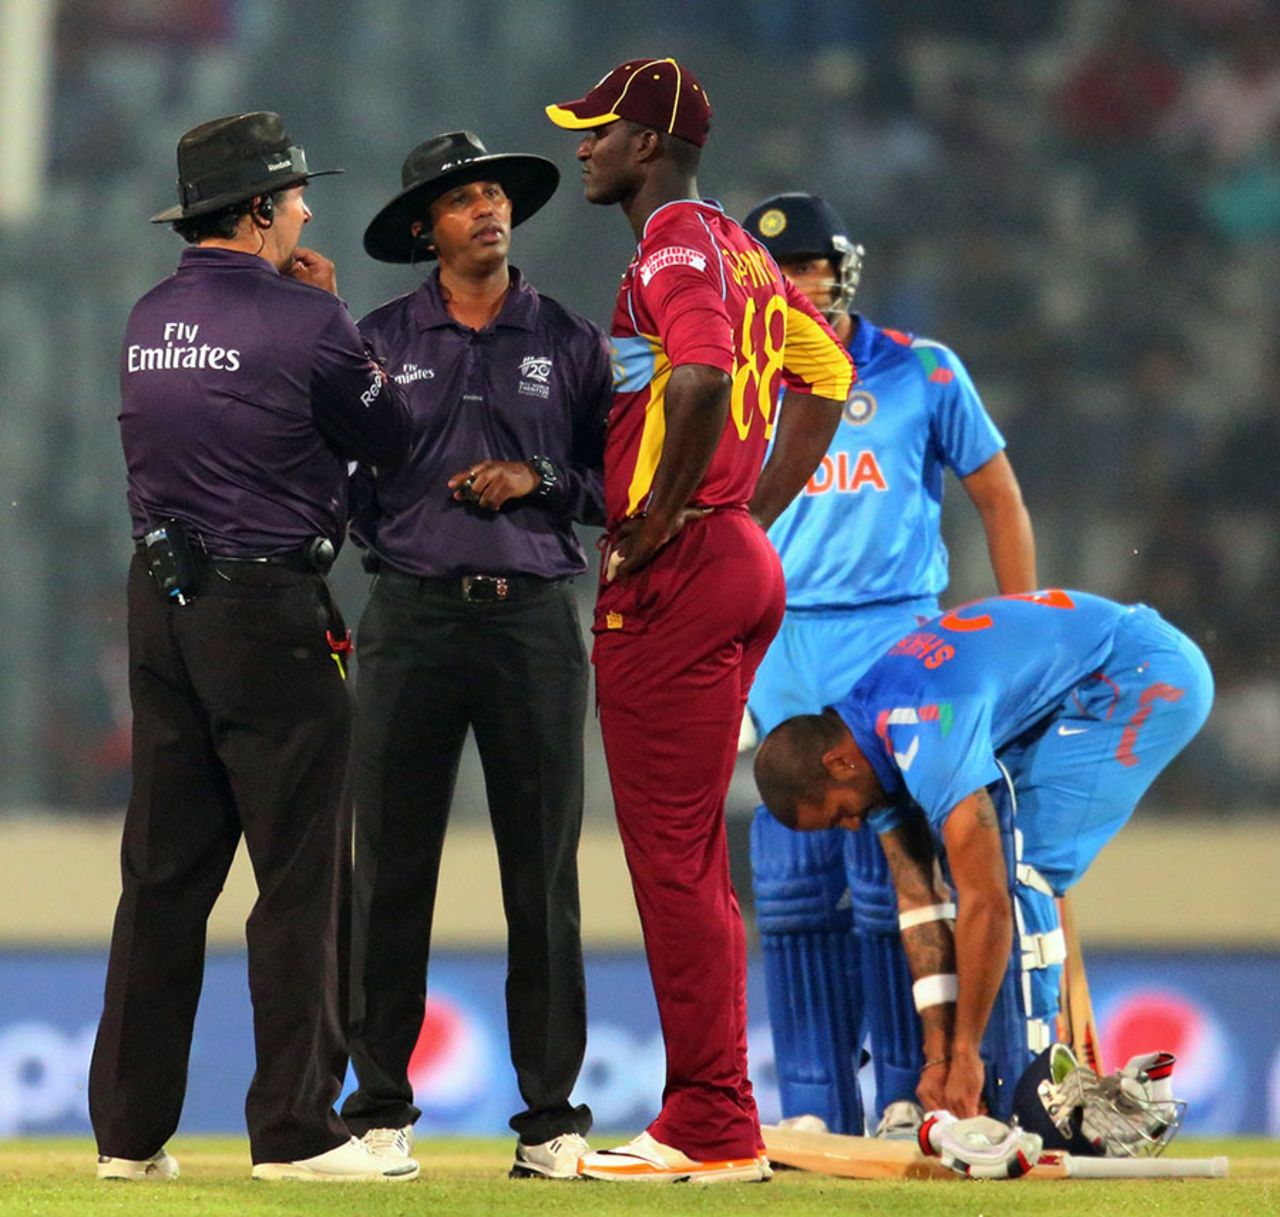 Darren Sammy talks to the umpires as the start of India's innings is delayed by a no-ball review,  India v West Indies, World T20, Group 2, Mirpur, March 23, 2014